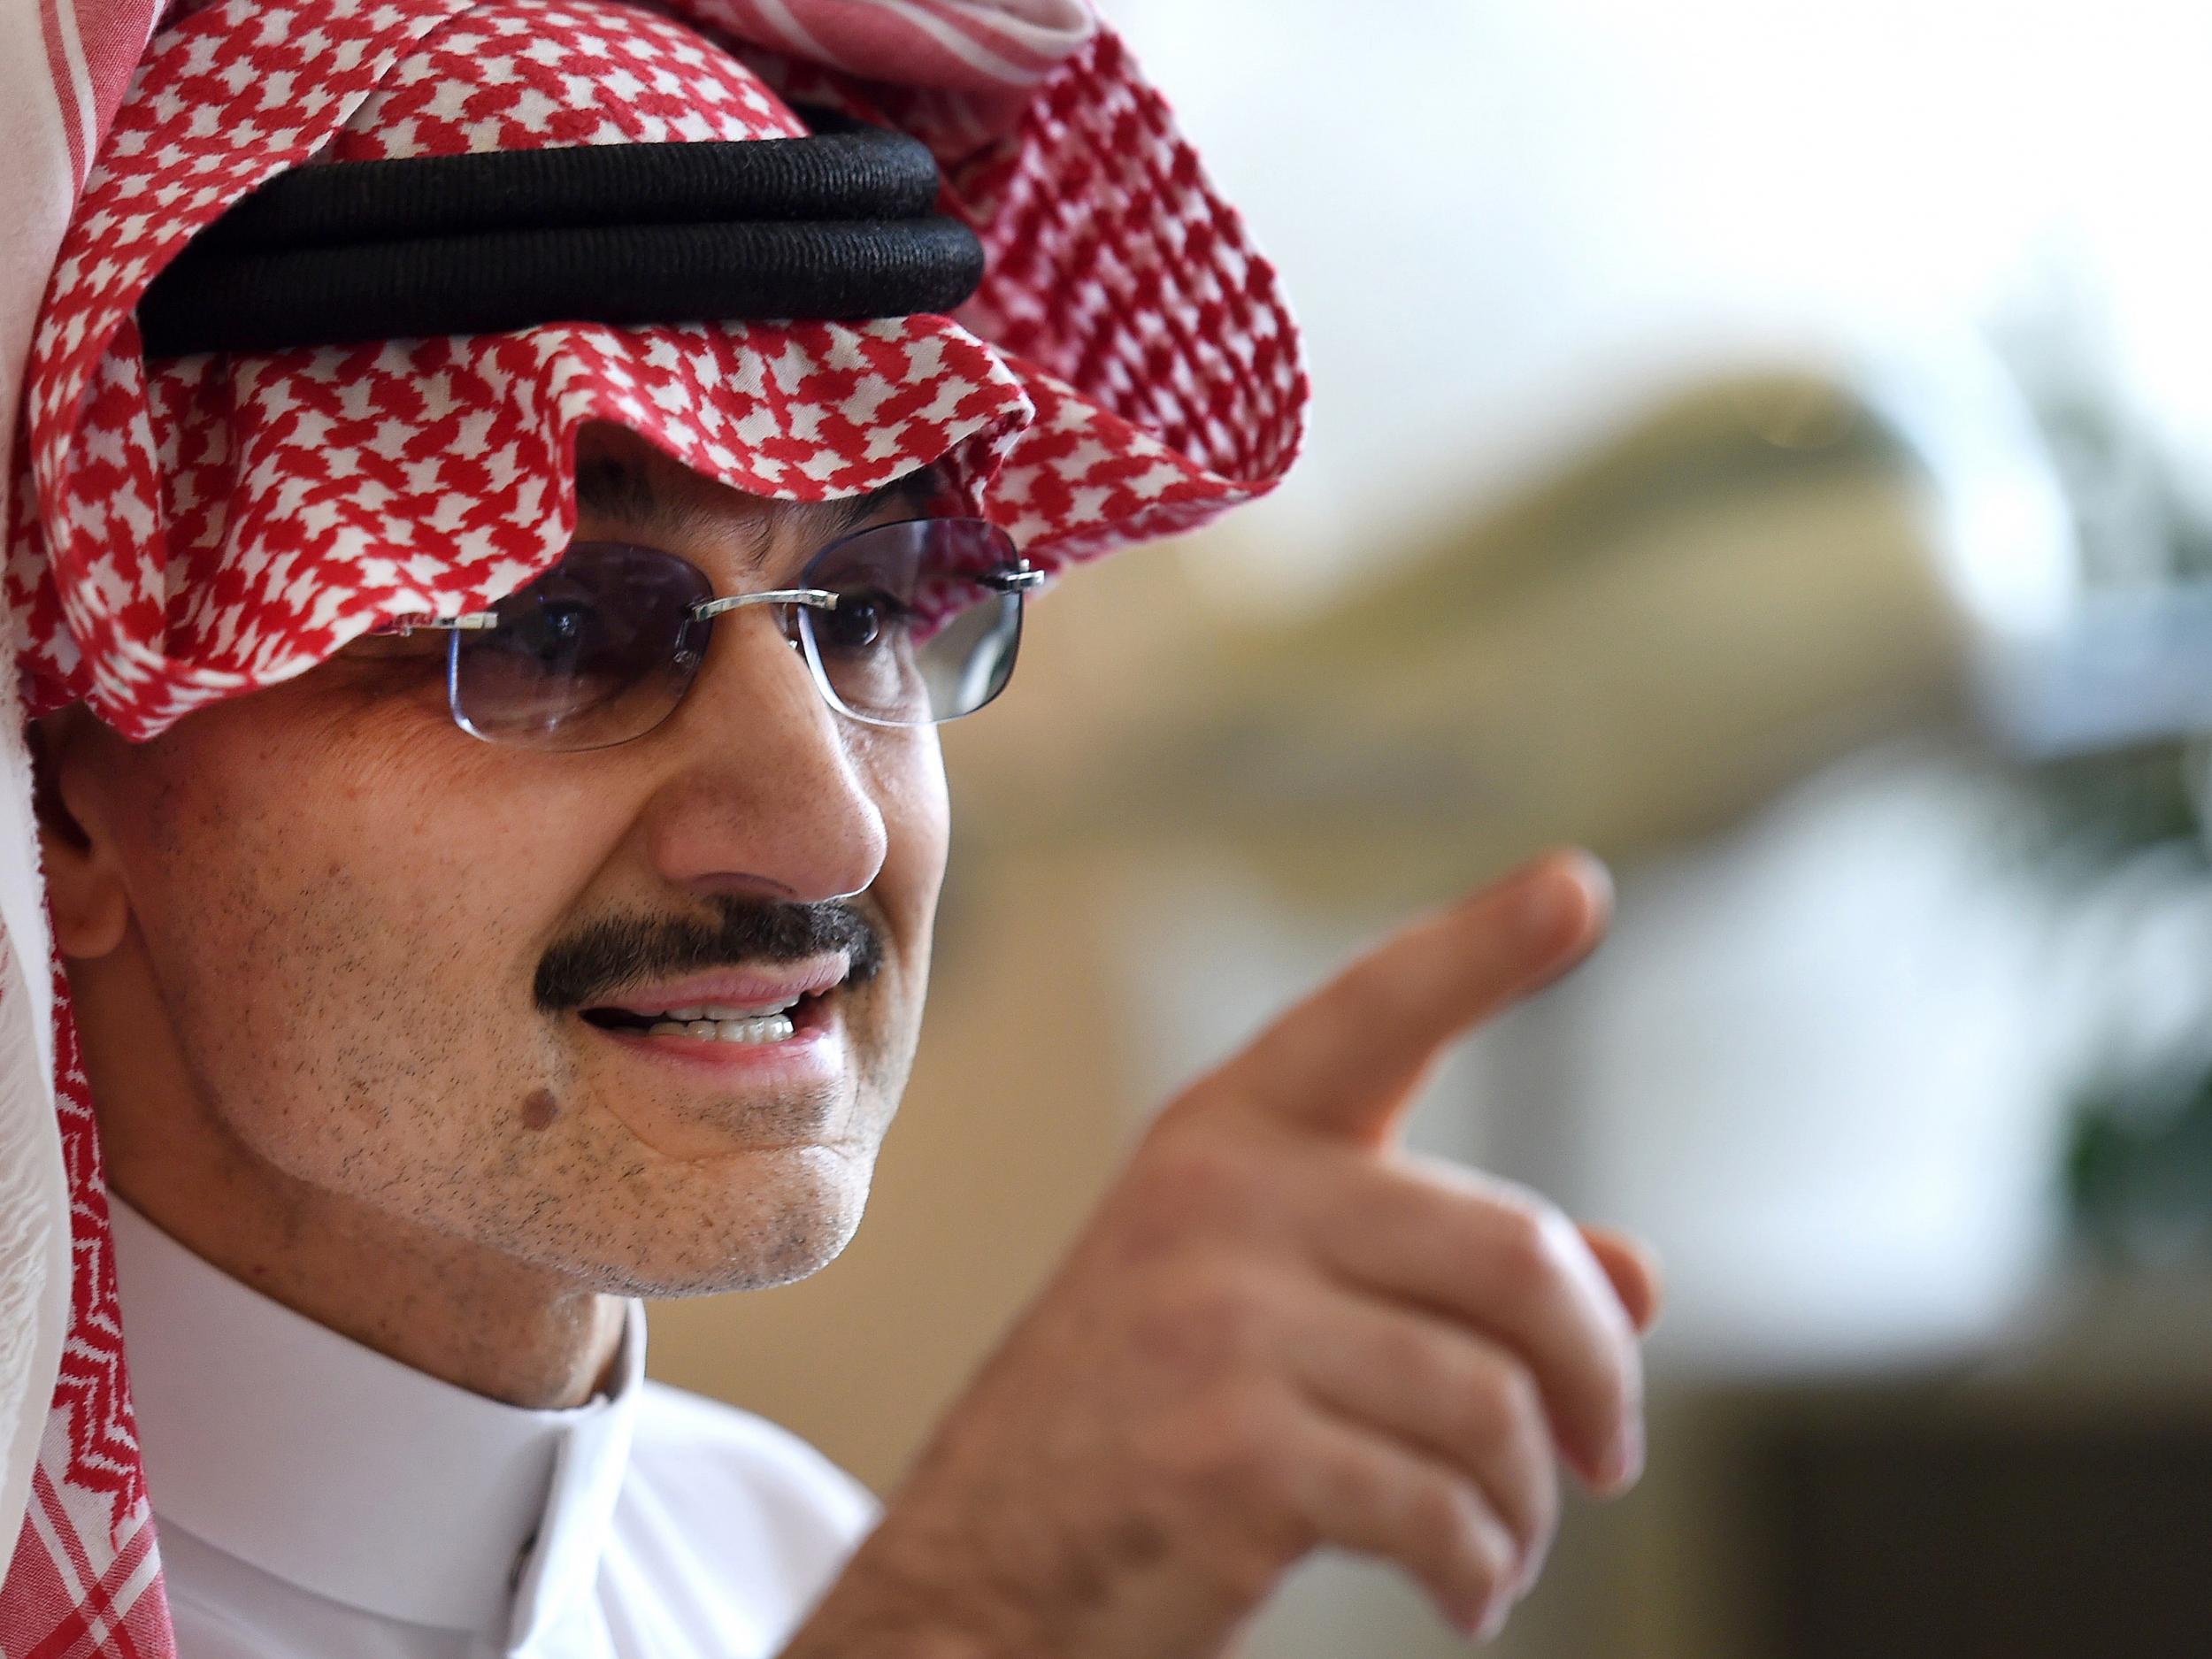 Prince Alwaleed bin Talal defended his call, saying current economic circumstances demanded it